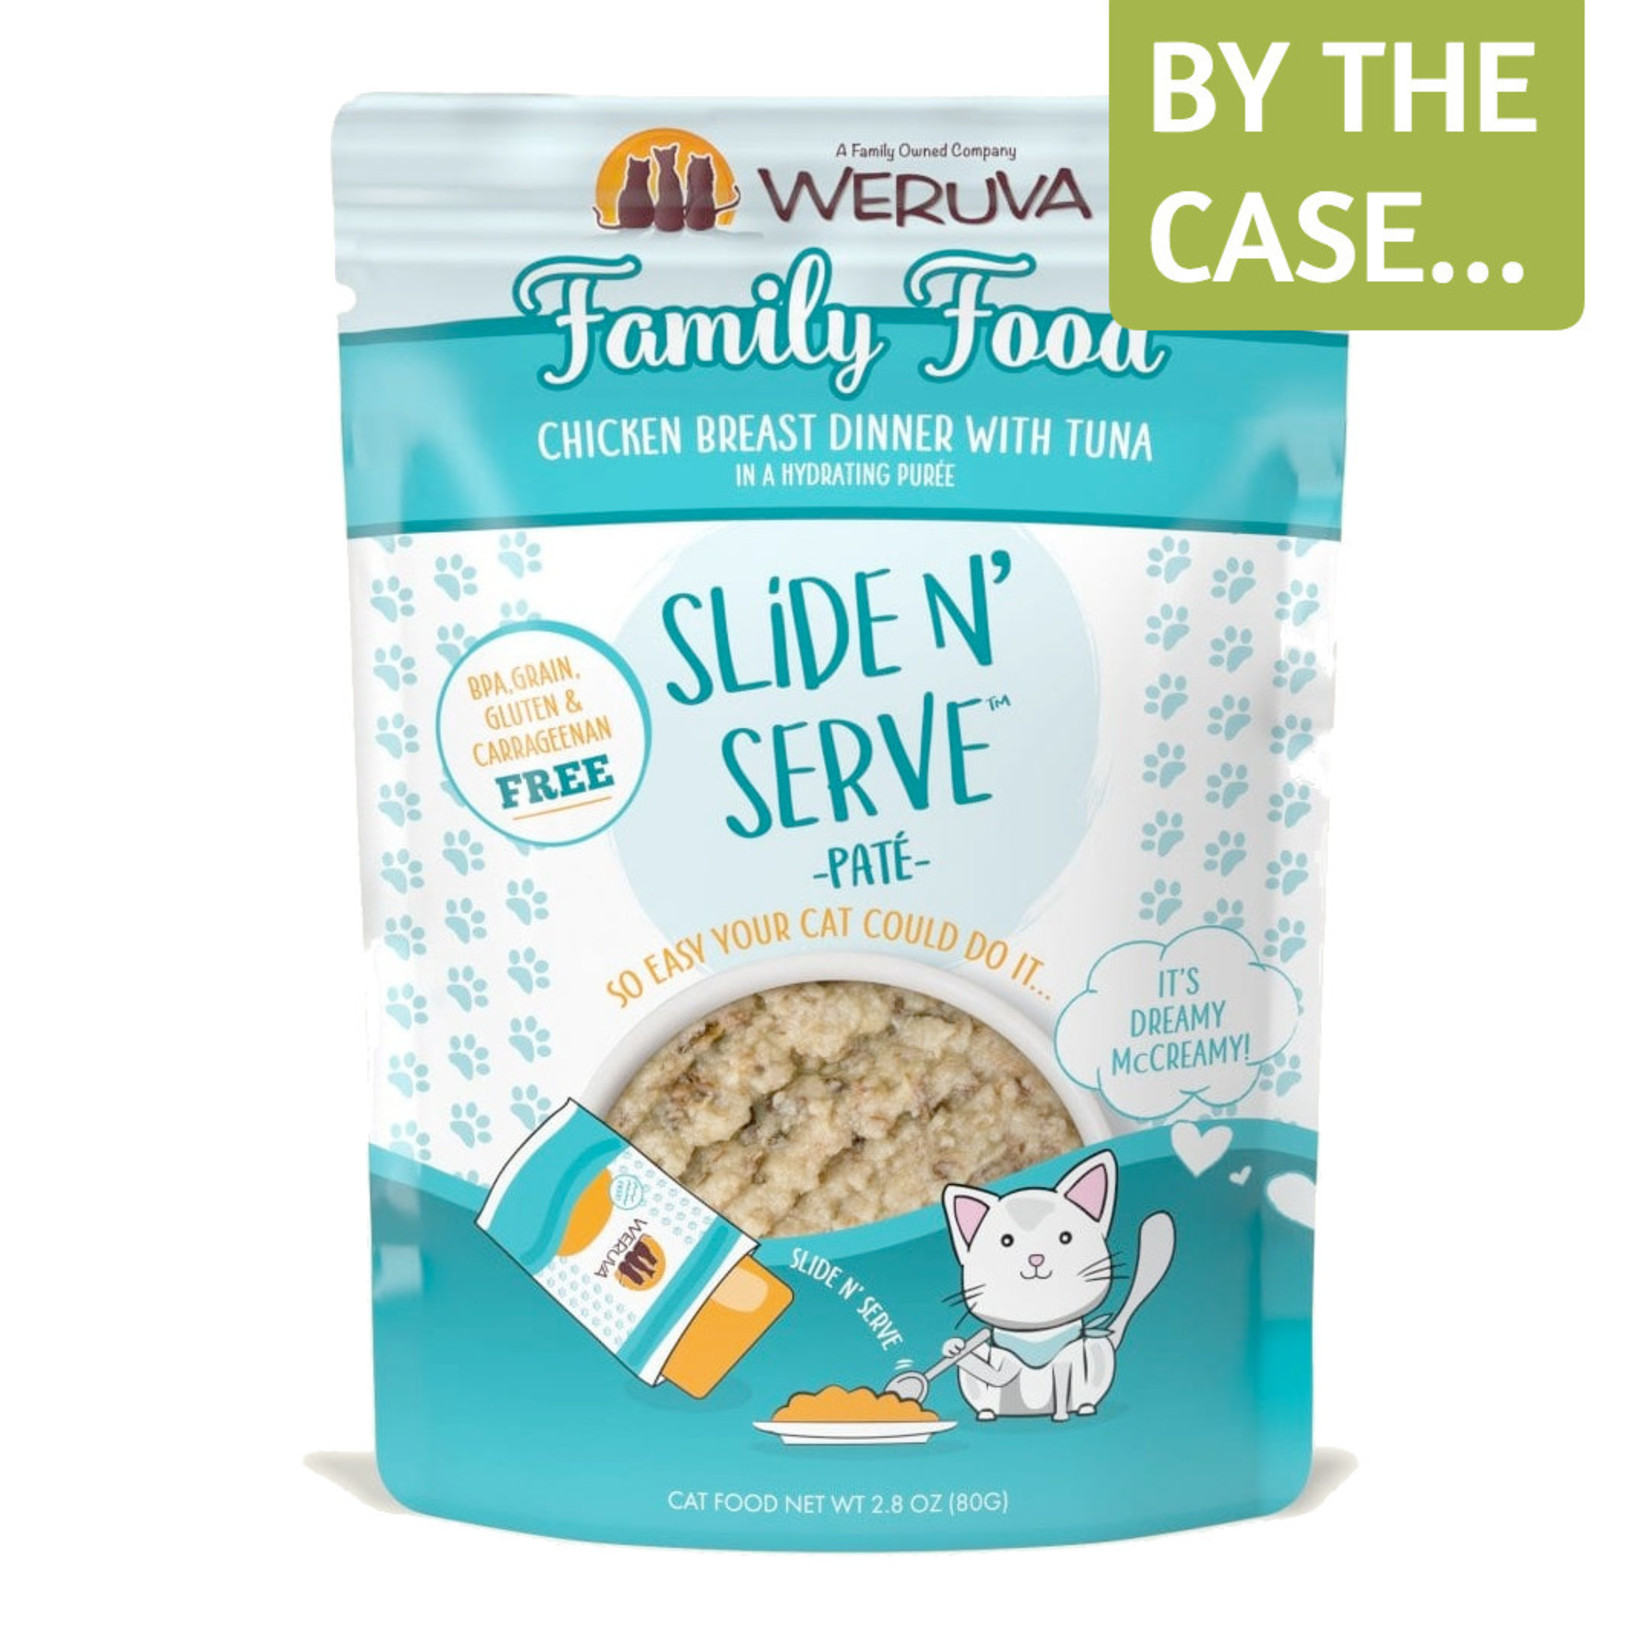 Weruva Weruva Wet Cat Food Slide & Serve Pate Family Food Chicken Breast Dinner with Tuna in a Hydrating Puree 2.8oz Pouch